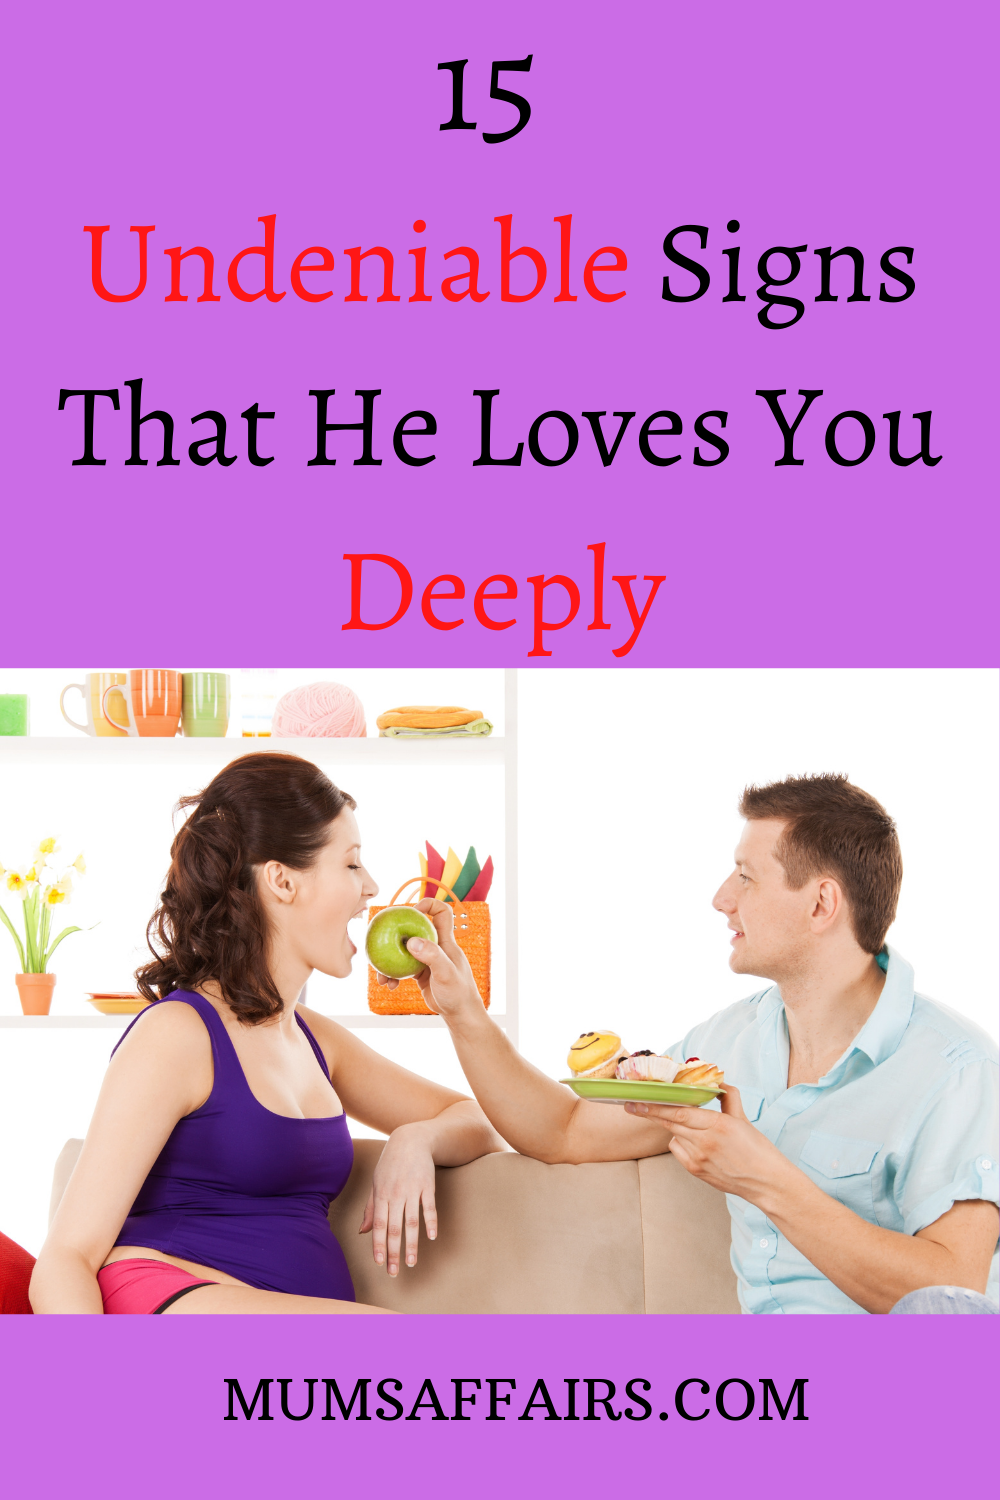 A man deeply signs loves you 7 Signs